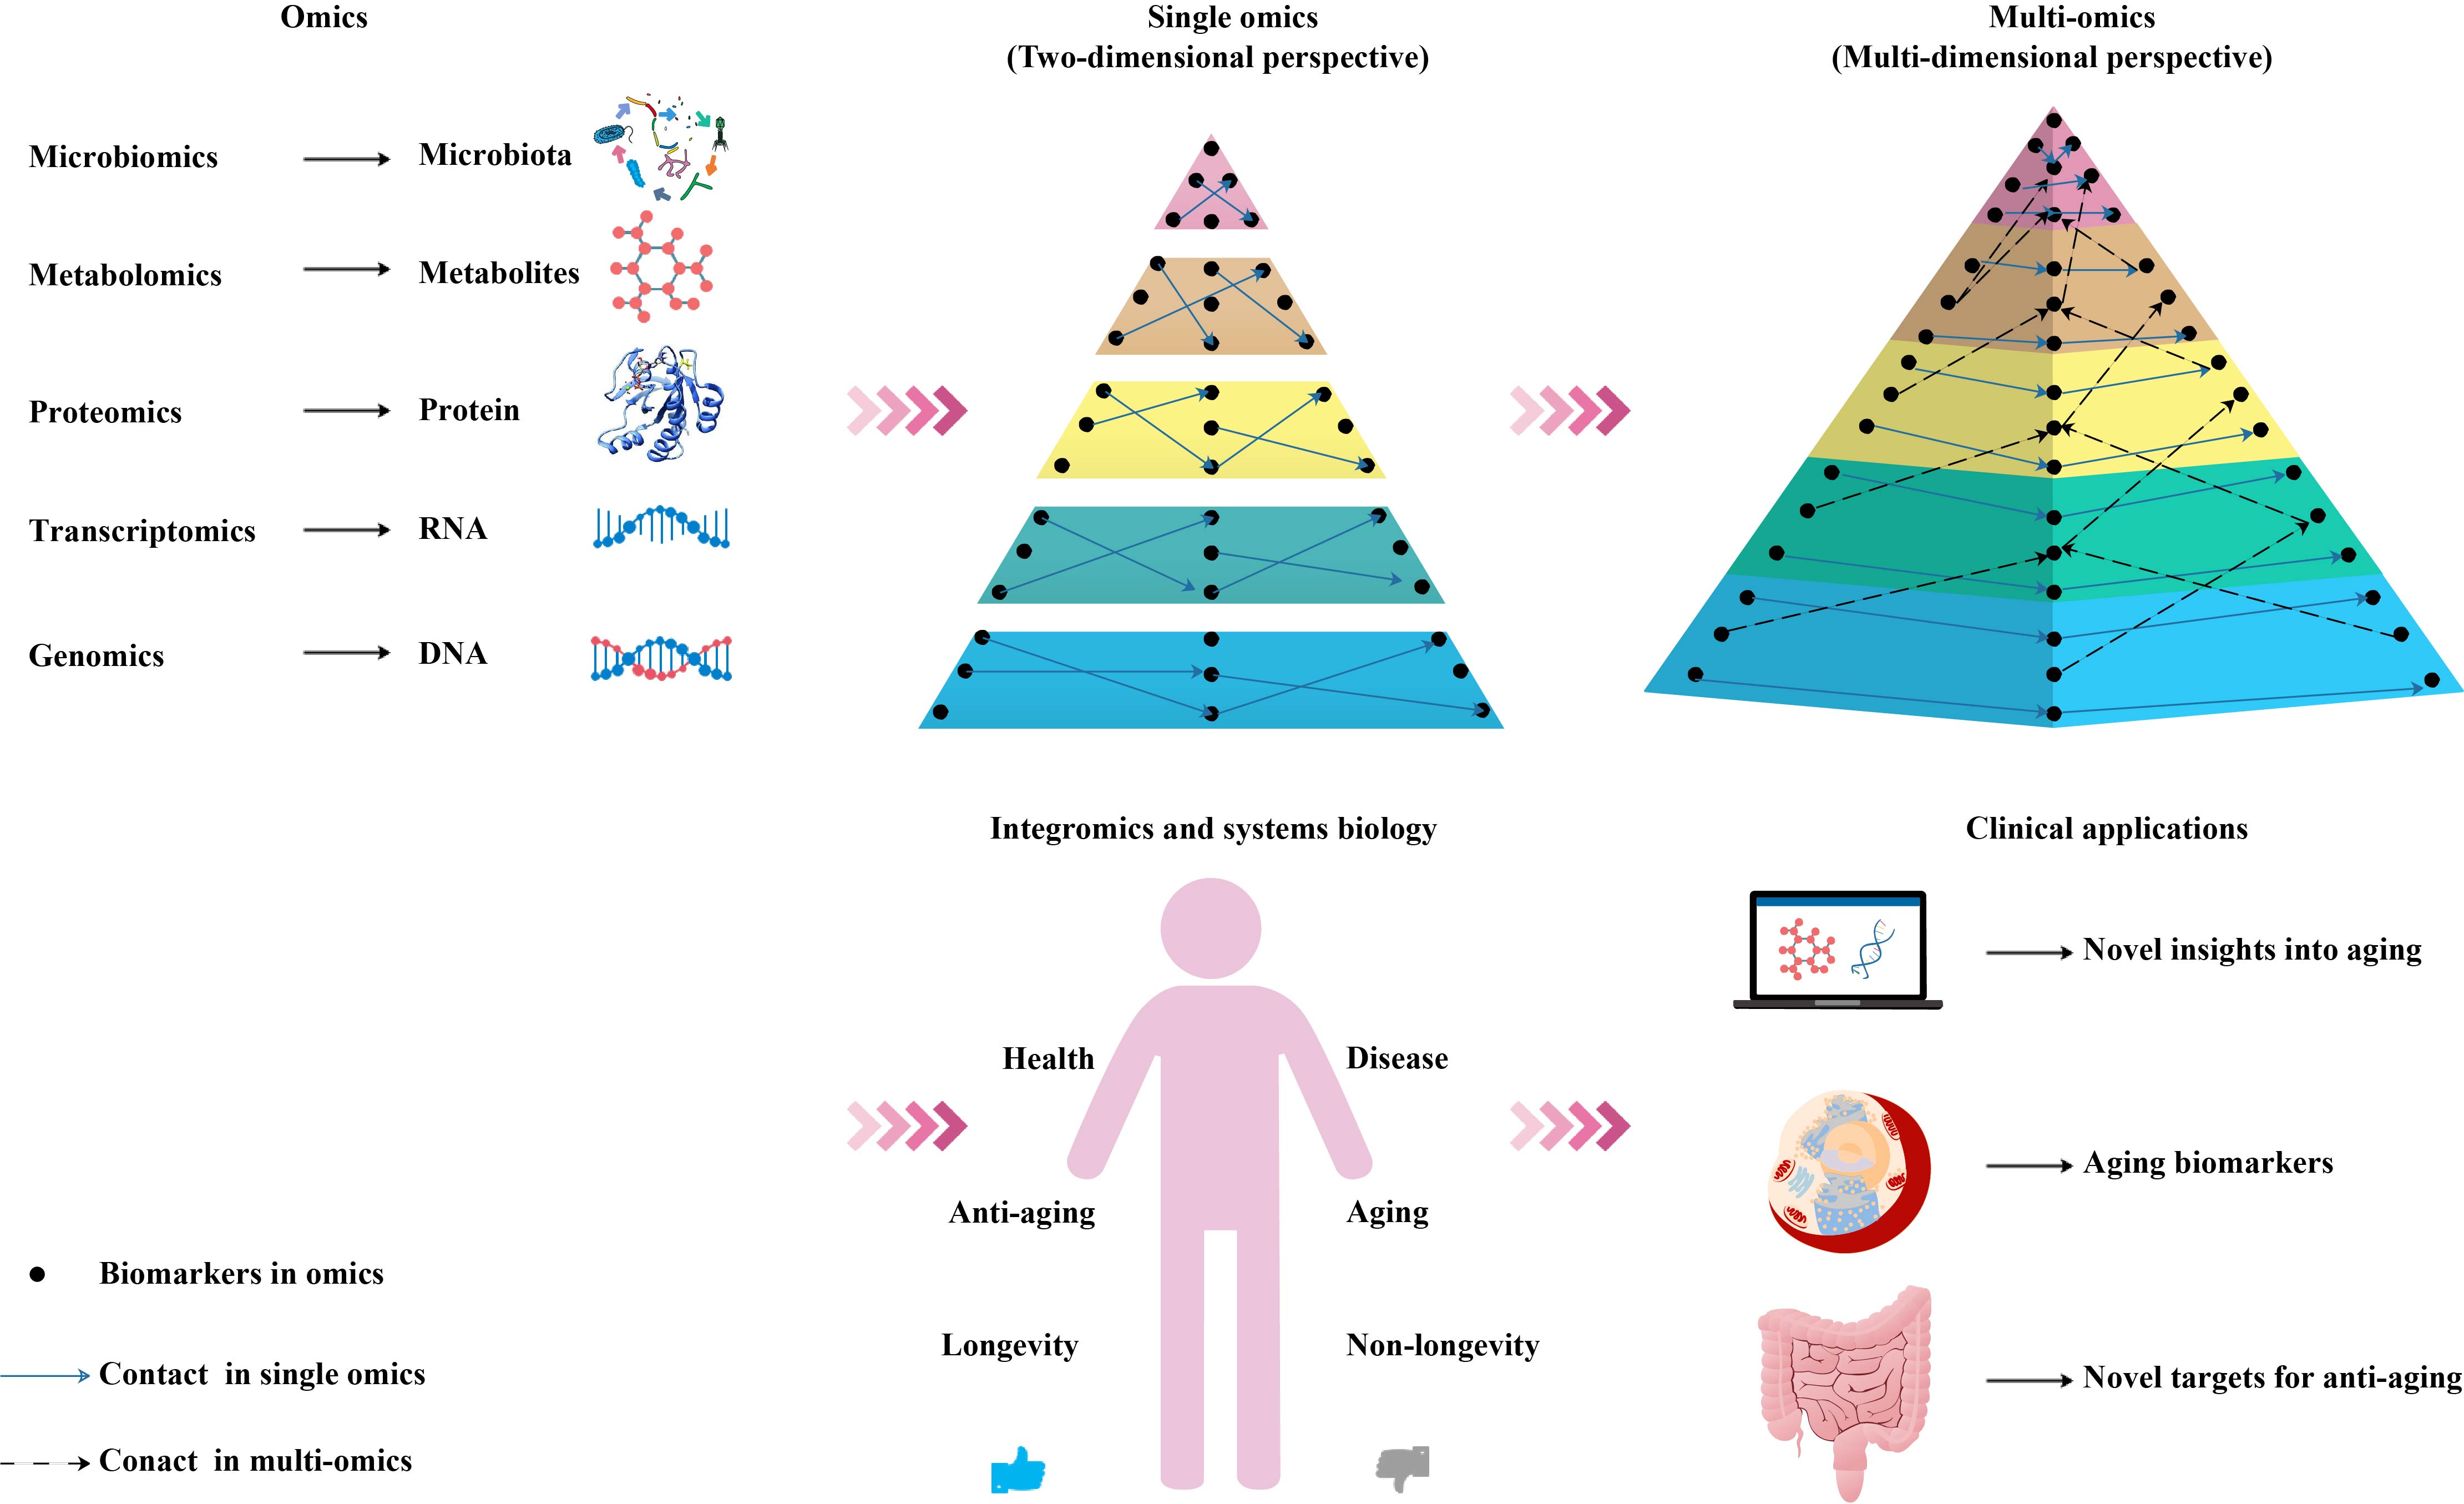 Figure 2. Schematic diagram of an integrated multi-omics approach to the research and application of aging biomarkers. Genomics, transcriptomics, proteomics, metabolomics, and microbiomics enable the high-throughput quantitative profiling of molecules in biological systems to reveal aging-related changes. Combining single-omics data with integromics and systems biology contributes to an increased understanding of the mechanisms of aging and paves the way for the development and utilization of aging biomarkers and novel antiaging targets.